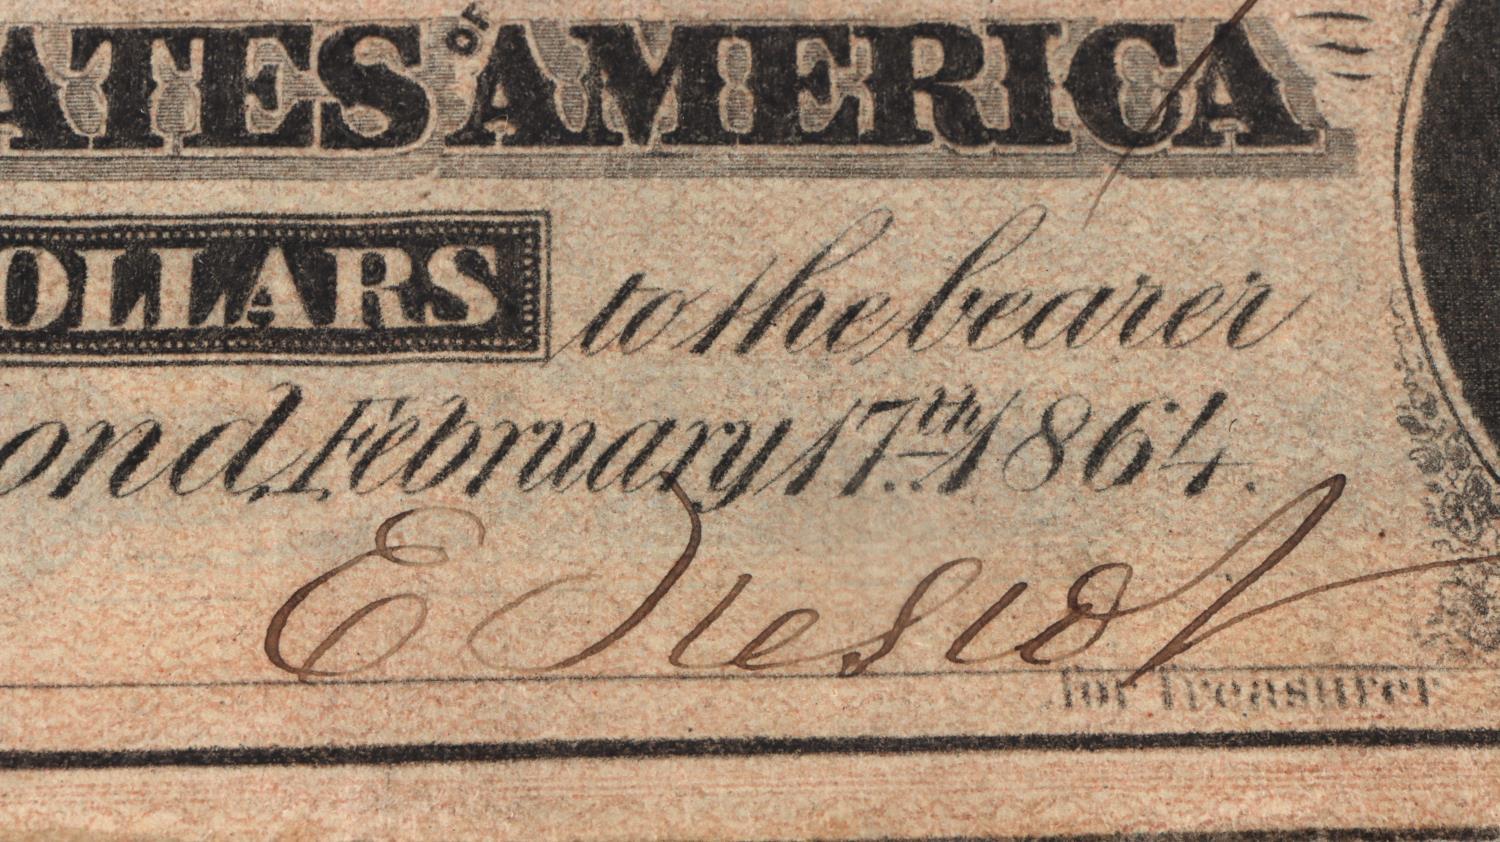 CONFEDERATE STATES OF AMERICA PAPER CURRENCY